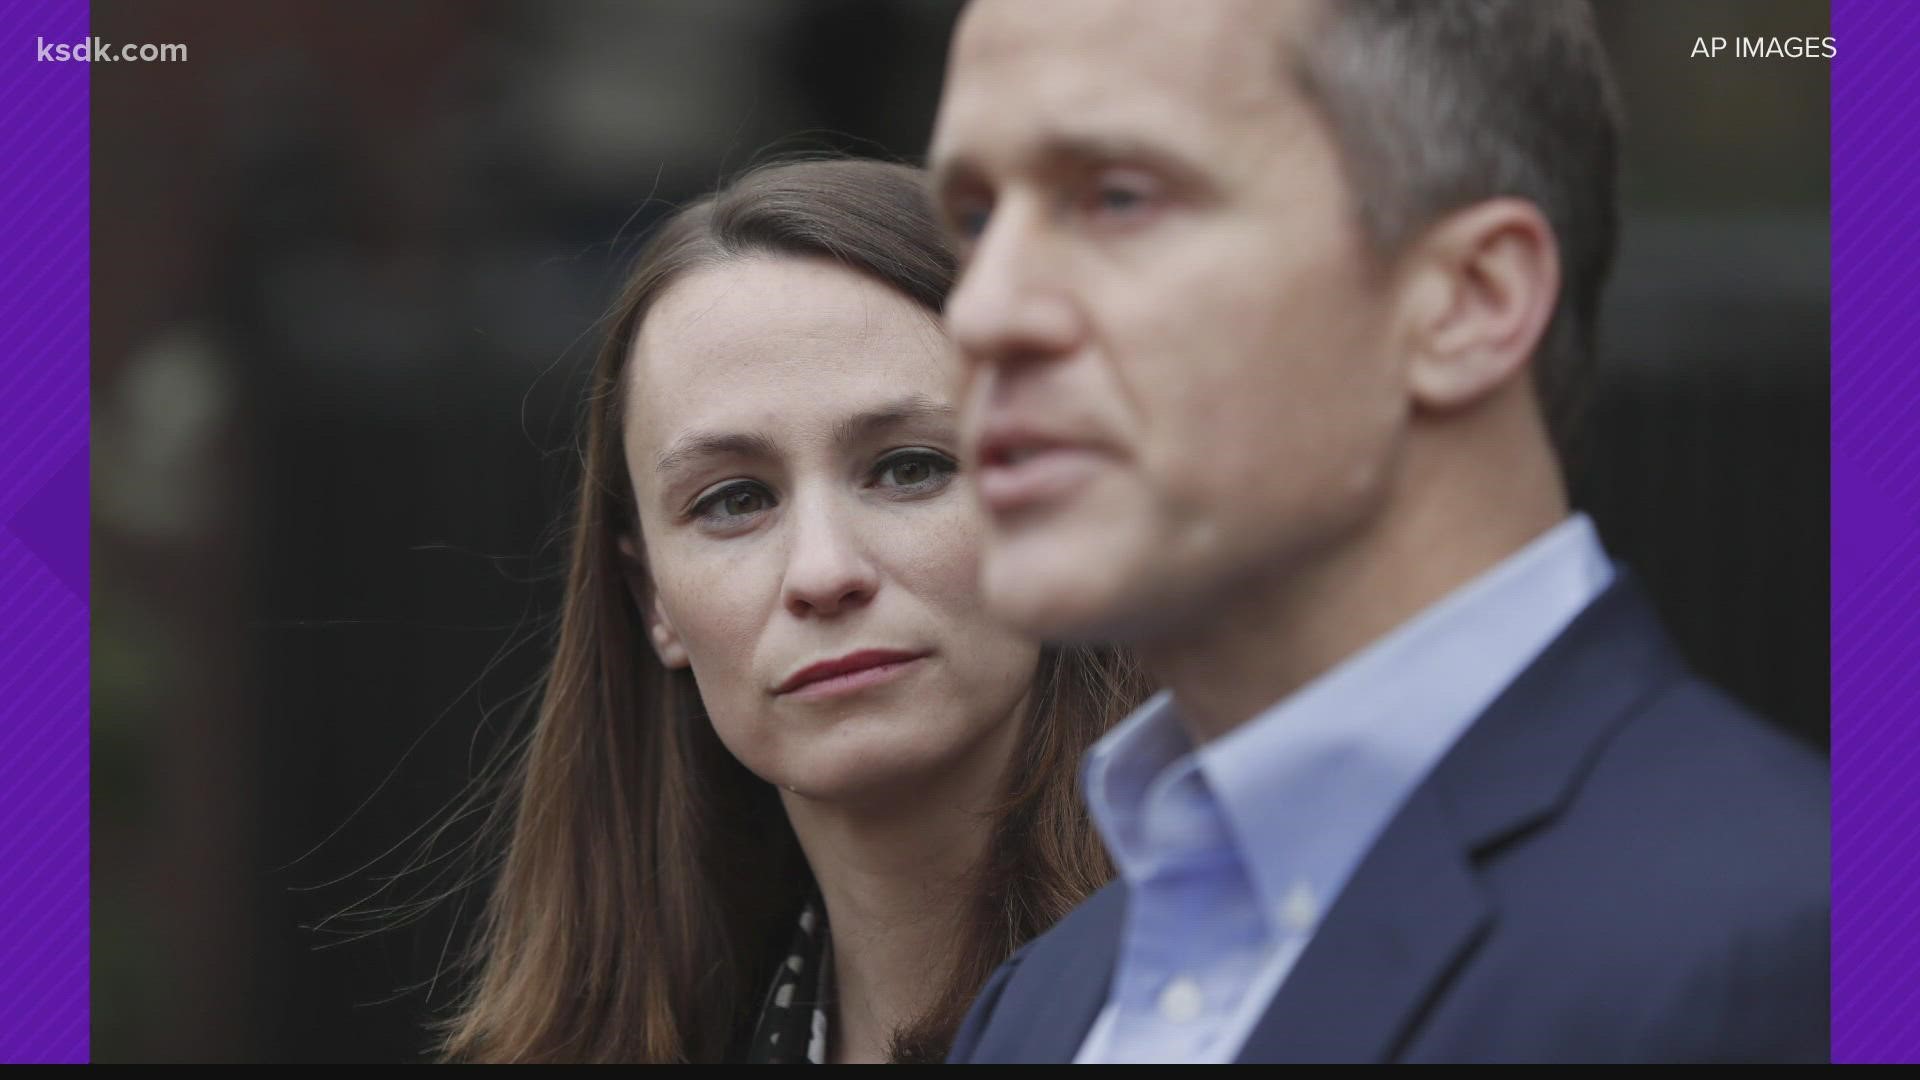 New allegations from Greitens' ex-wife were revealed in court records on Monday.